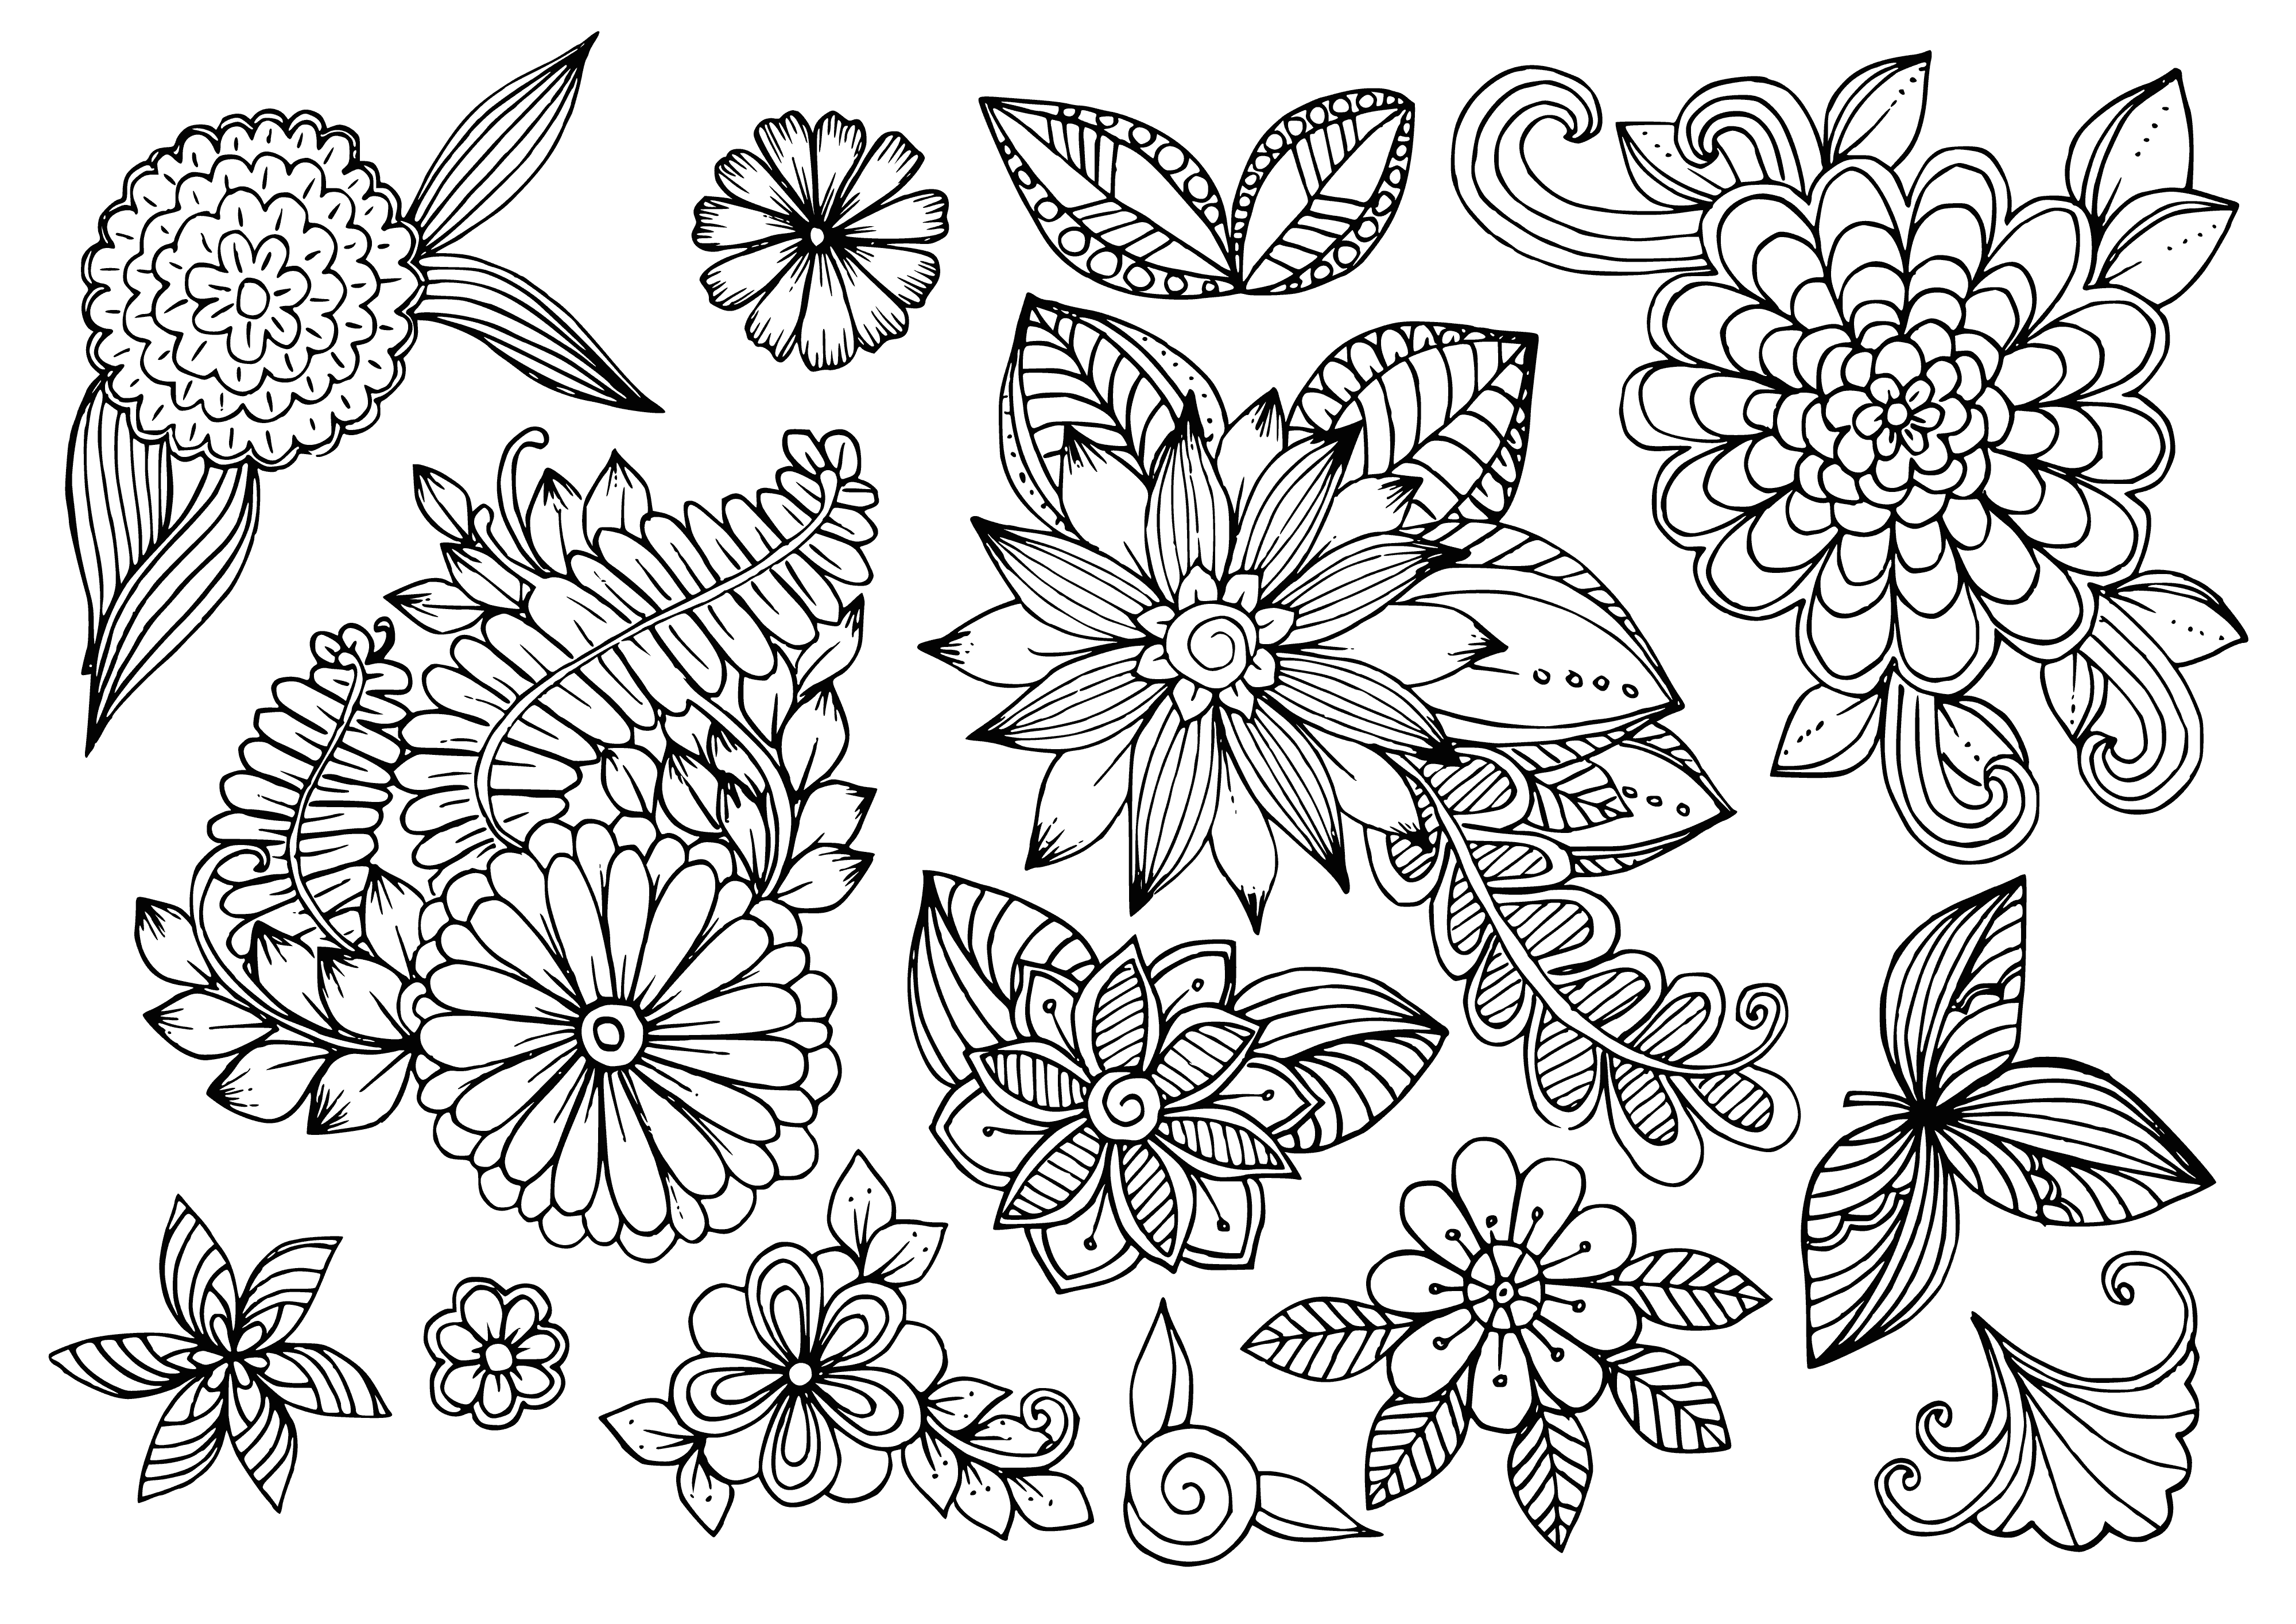 coloring page: A beautiful coloring page w/ a center yellow flower surrounded by smaller blooms in pink, purple, blue & green leaves.